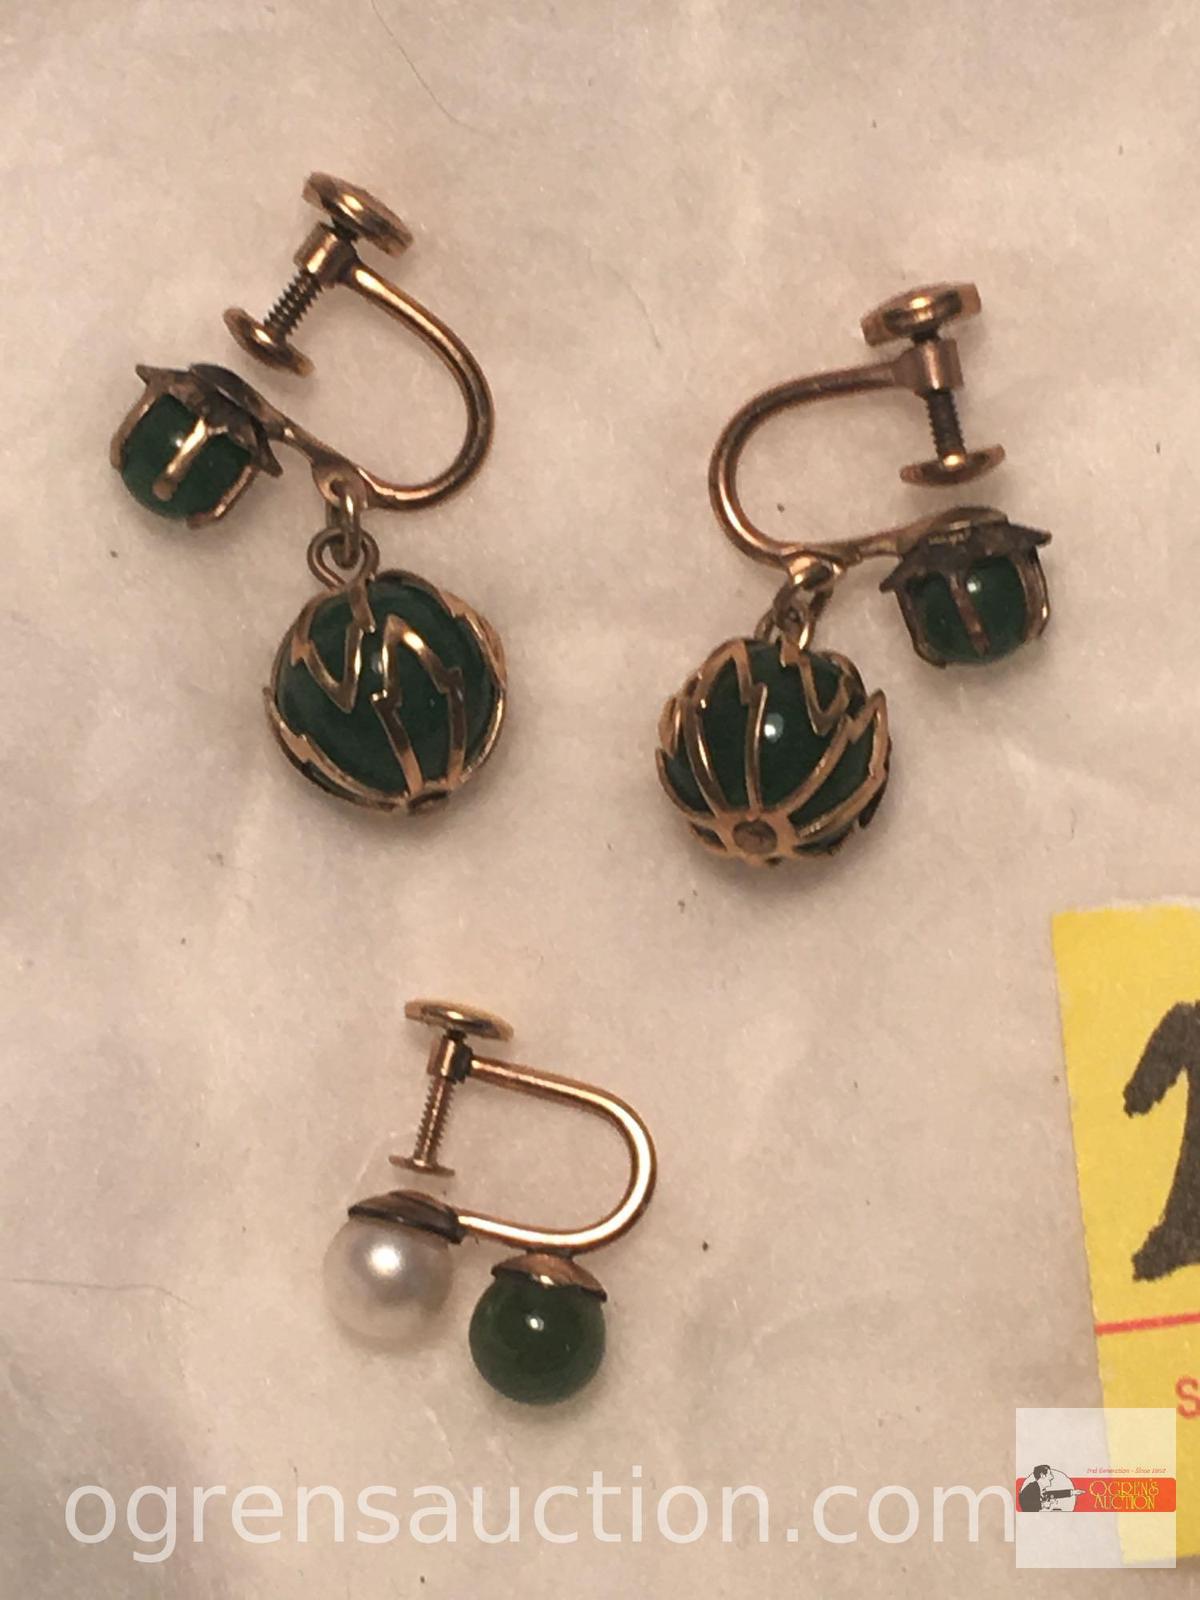 Jewelry - earrings, 1 pr. and 1 single 12k gold filled screw back with jade